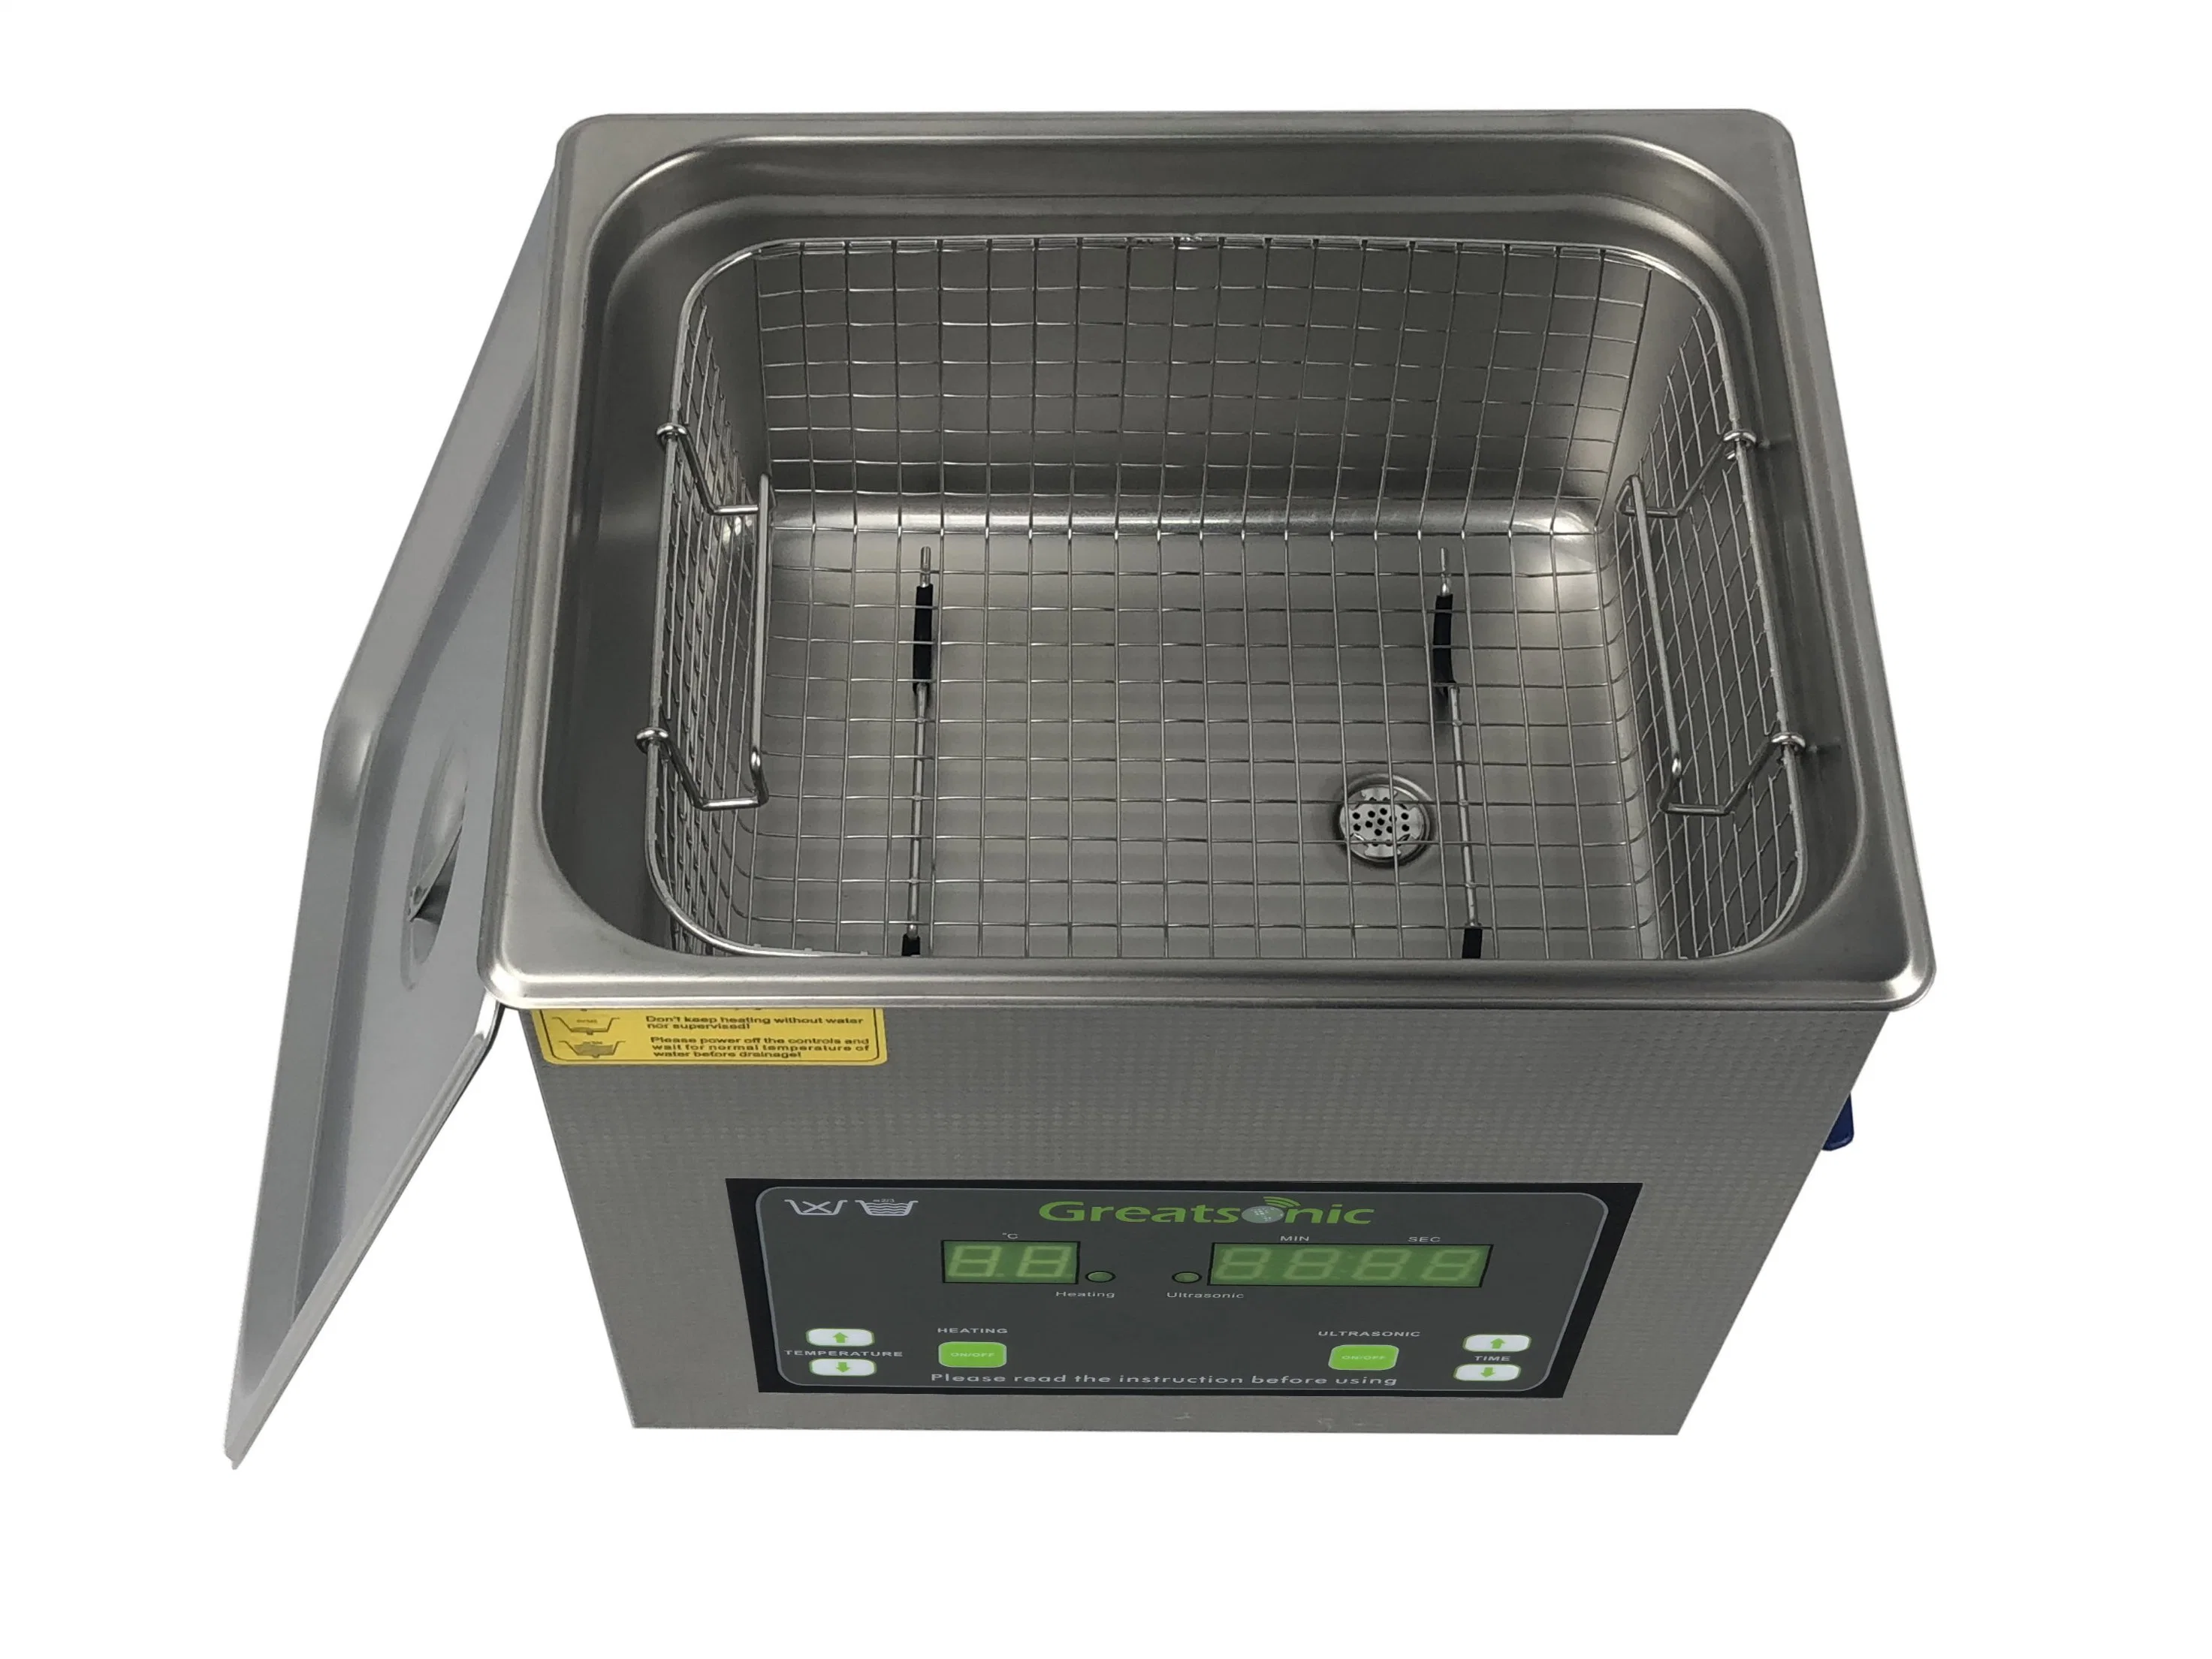 Digital Bench Top Ultrasonic Cleaner for Cleaning Instruments